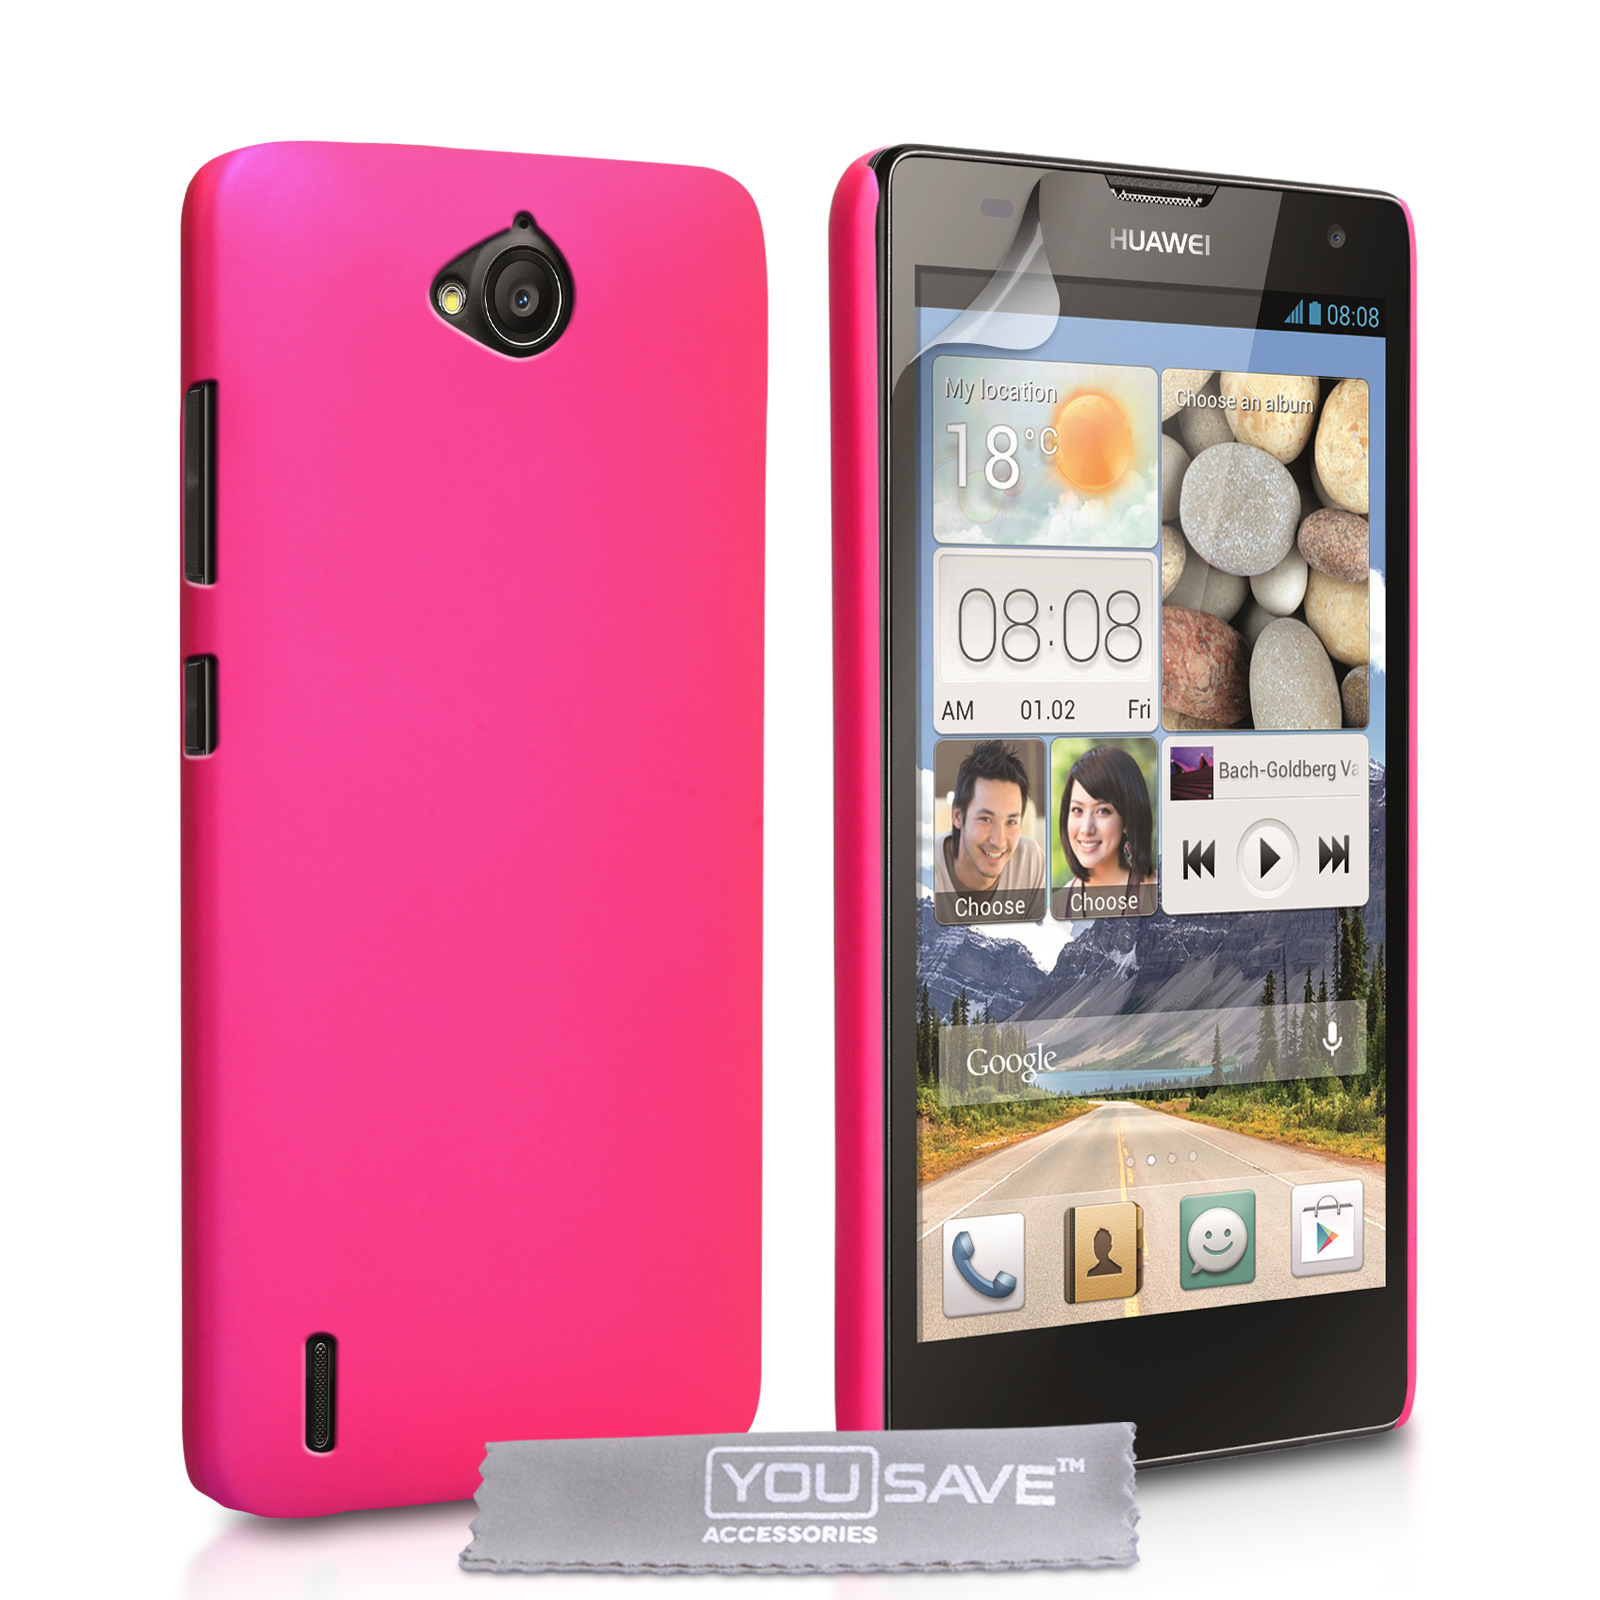 YouSave Accessories Huawei Ascend G740 Hard Hybrid Case - Hot Pink